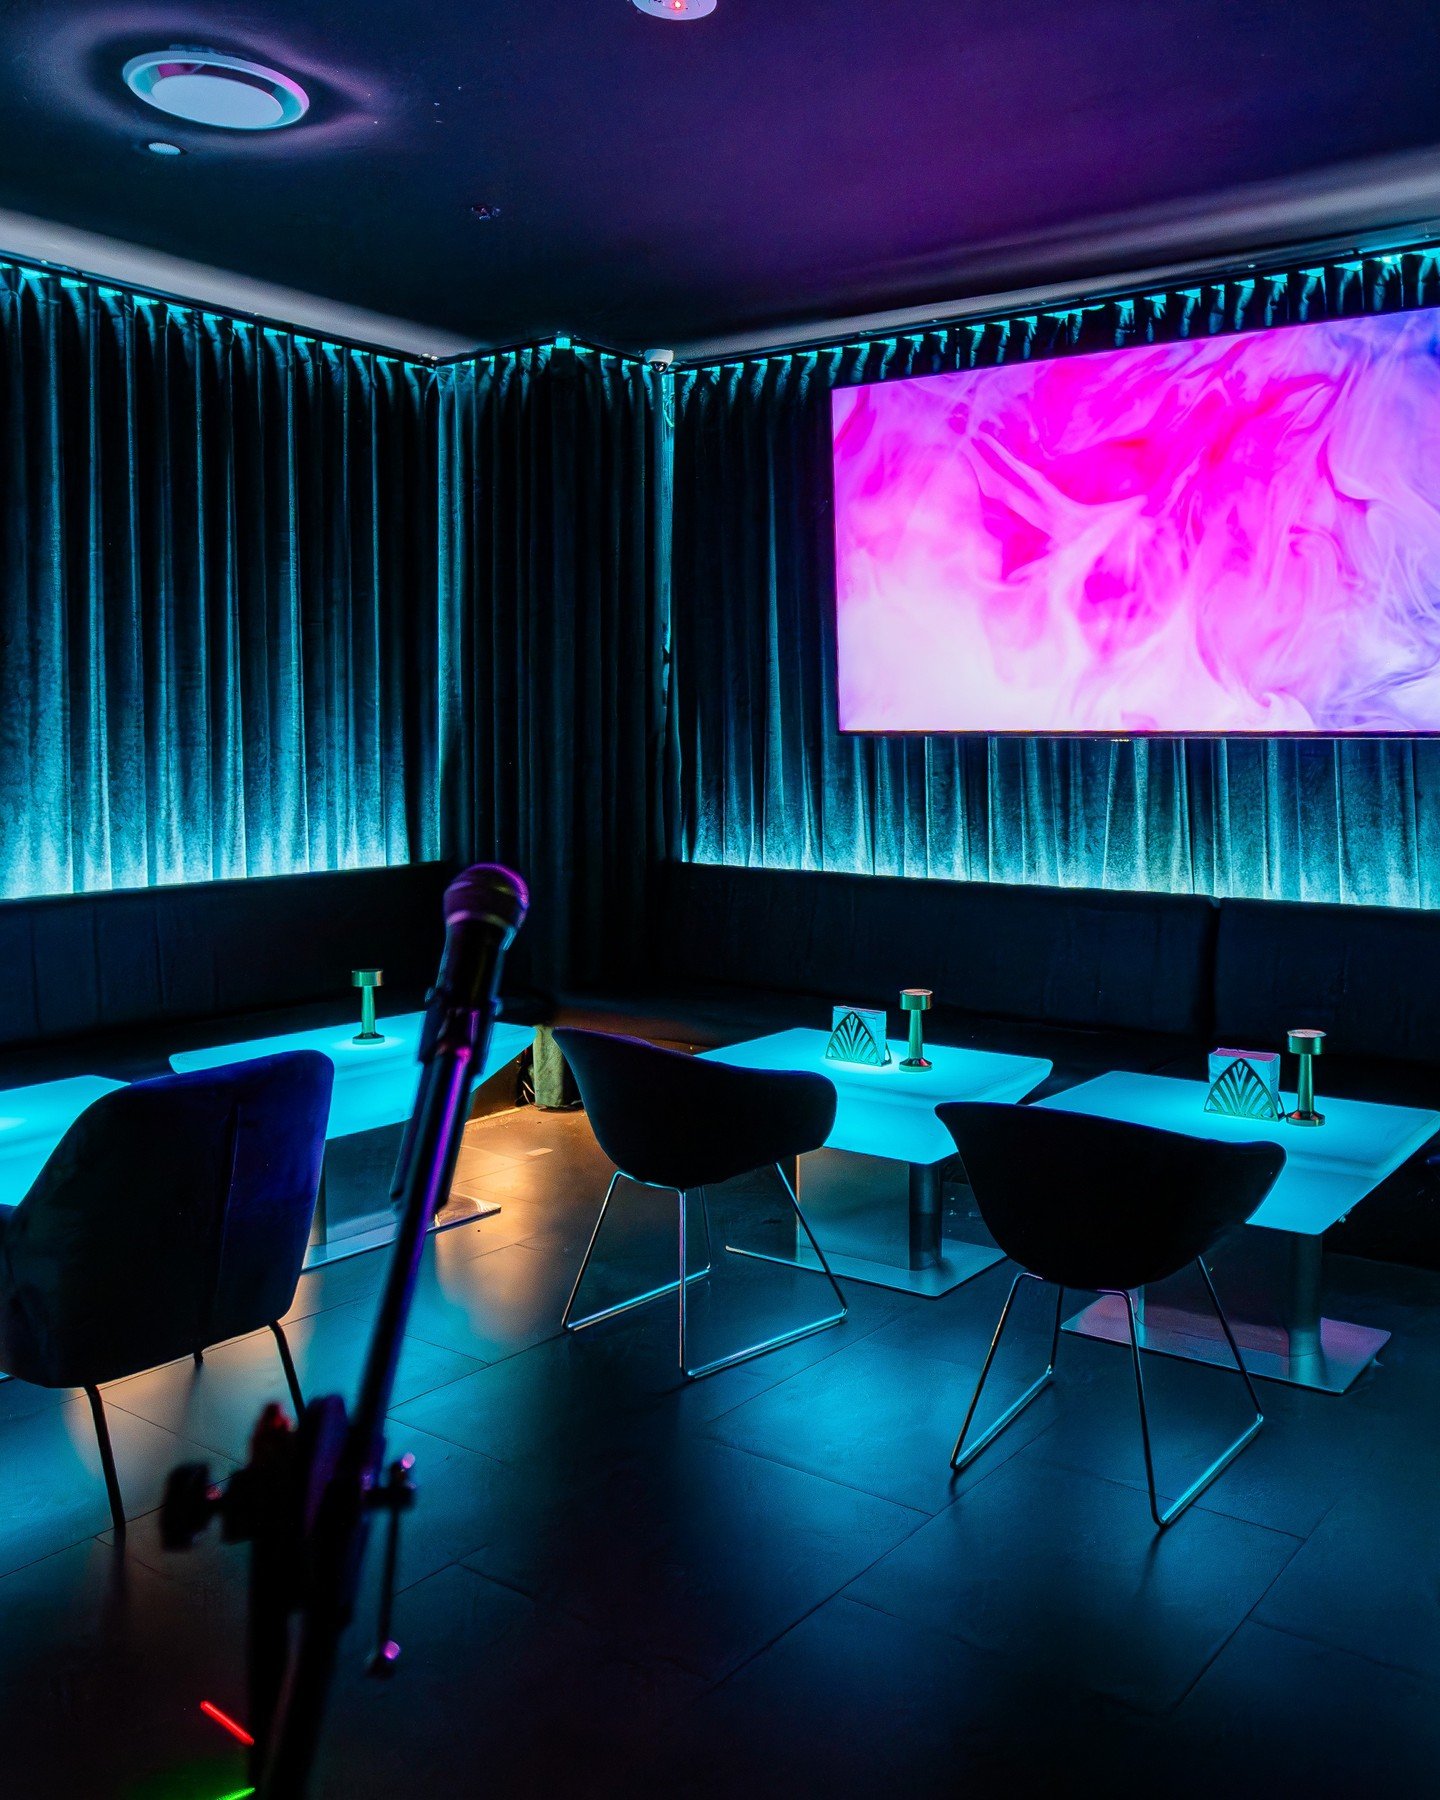 🌟 Amp up your night at Replay Karaoke! 🎤🍽️ 

Vibe into our lit VIP rooms, perfect for up to 60 friends. Enjoy private spaces with dedicated restrooms for all your singing, vibing, and dining escapades. 🍣🎵🪇

📍 Level 1 of @littlesaigonplaza
📞 1